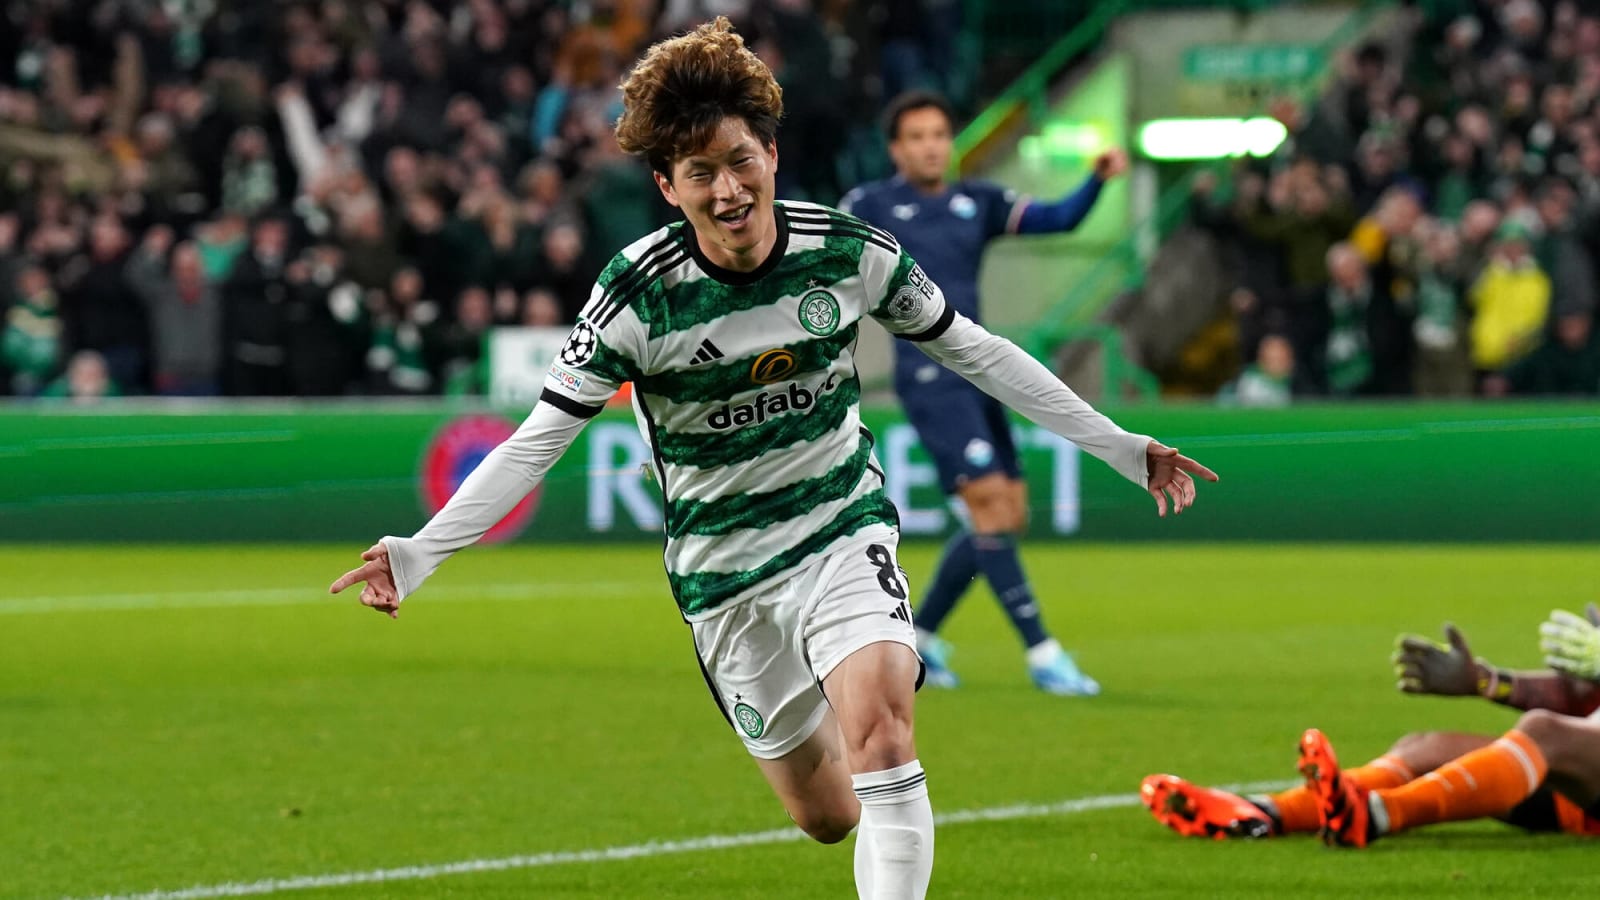 Watch: Celtic Park erupts as home side take lead in Champions League clash